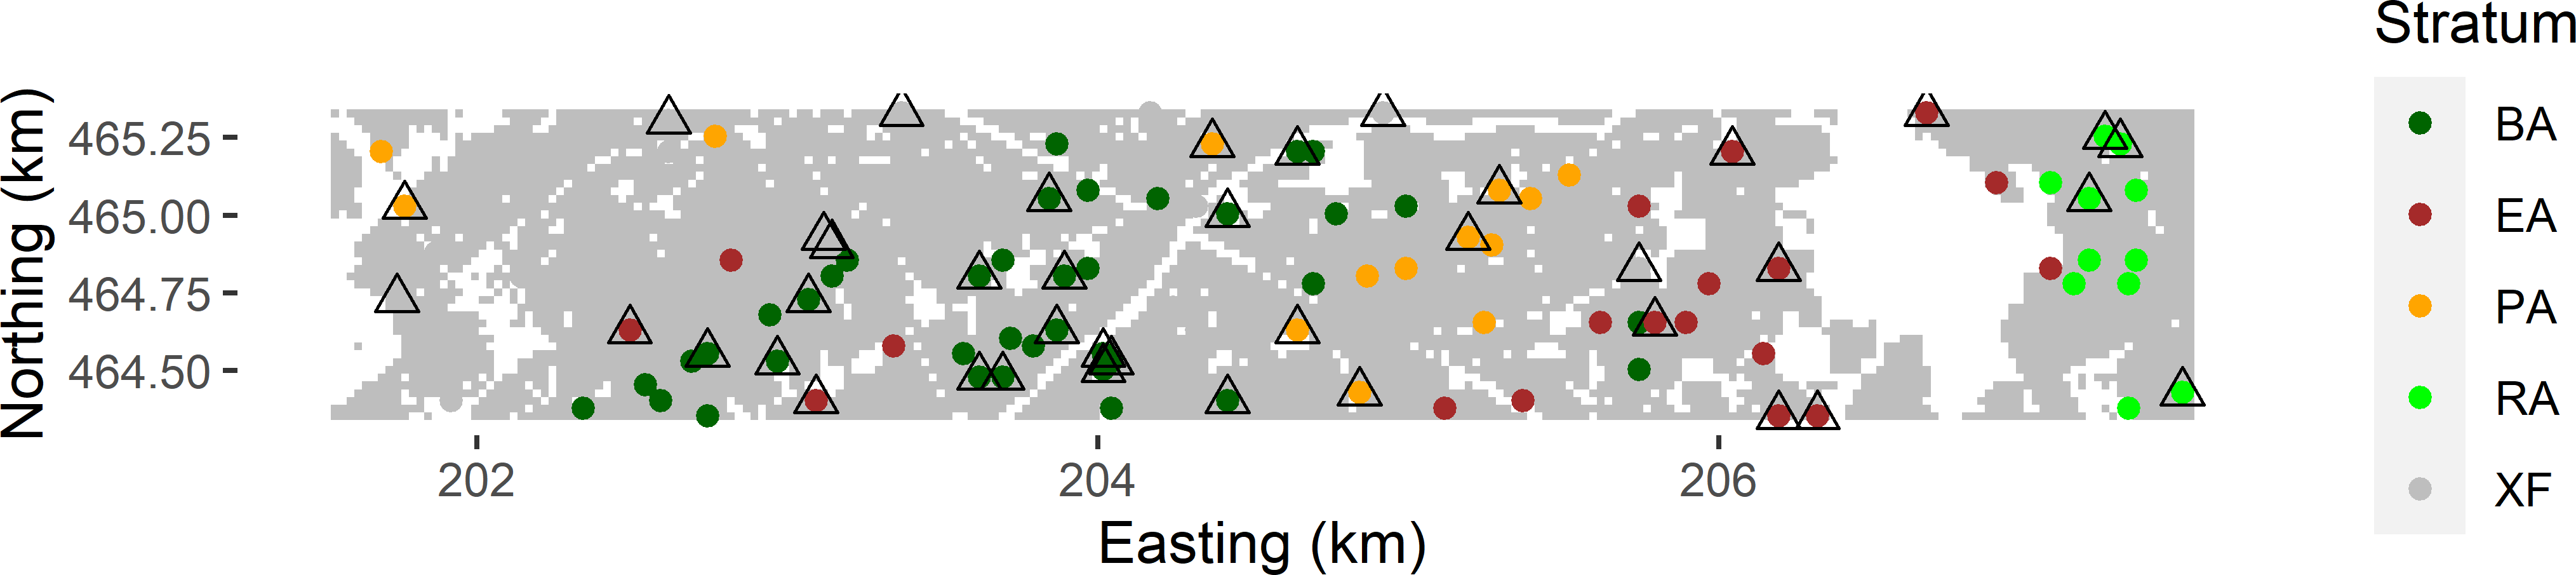 Two-phase random sample for stratification from Voorst. Coloured dots: first-phase sample of 100 points selected by simple random sampling, with observations of the soil-land use combination.  Triangles: second-phase sample of 40 points selected by stratified simple random subsampling of the first-phase sample, using the soil-land use combinations as strata, with measurements of SOM.